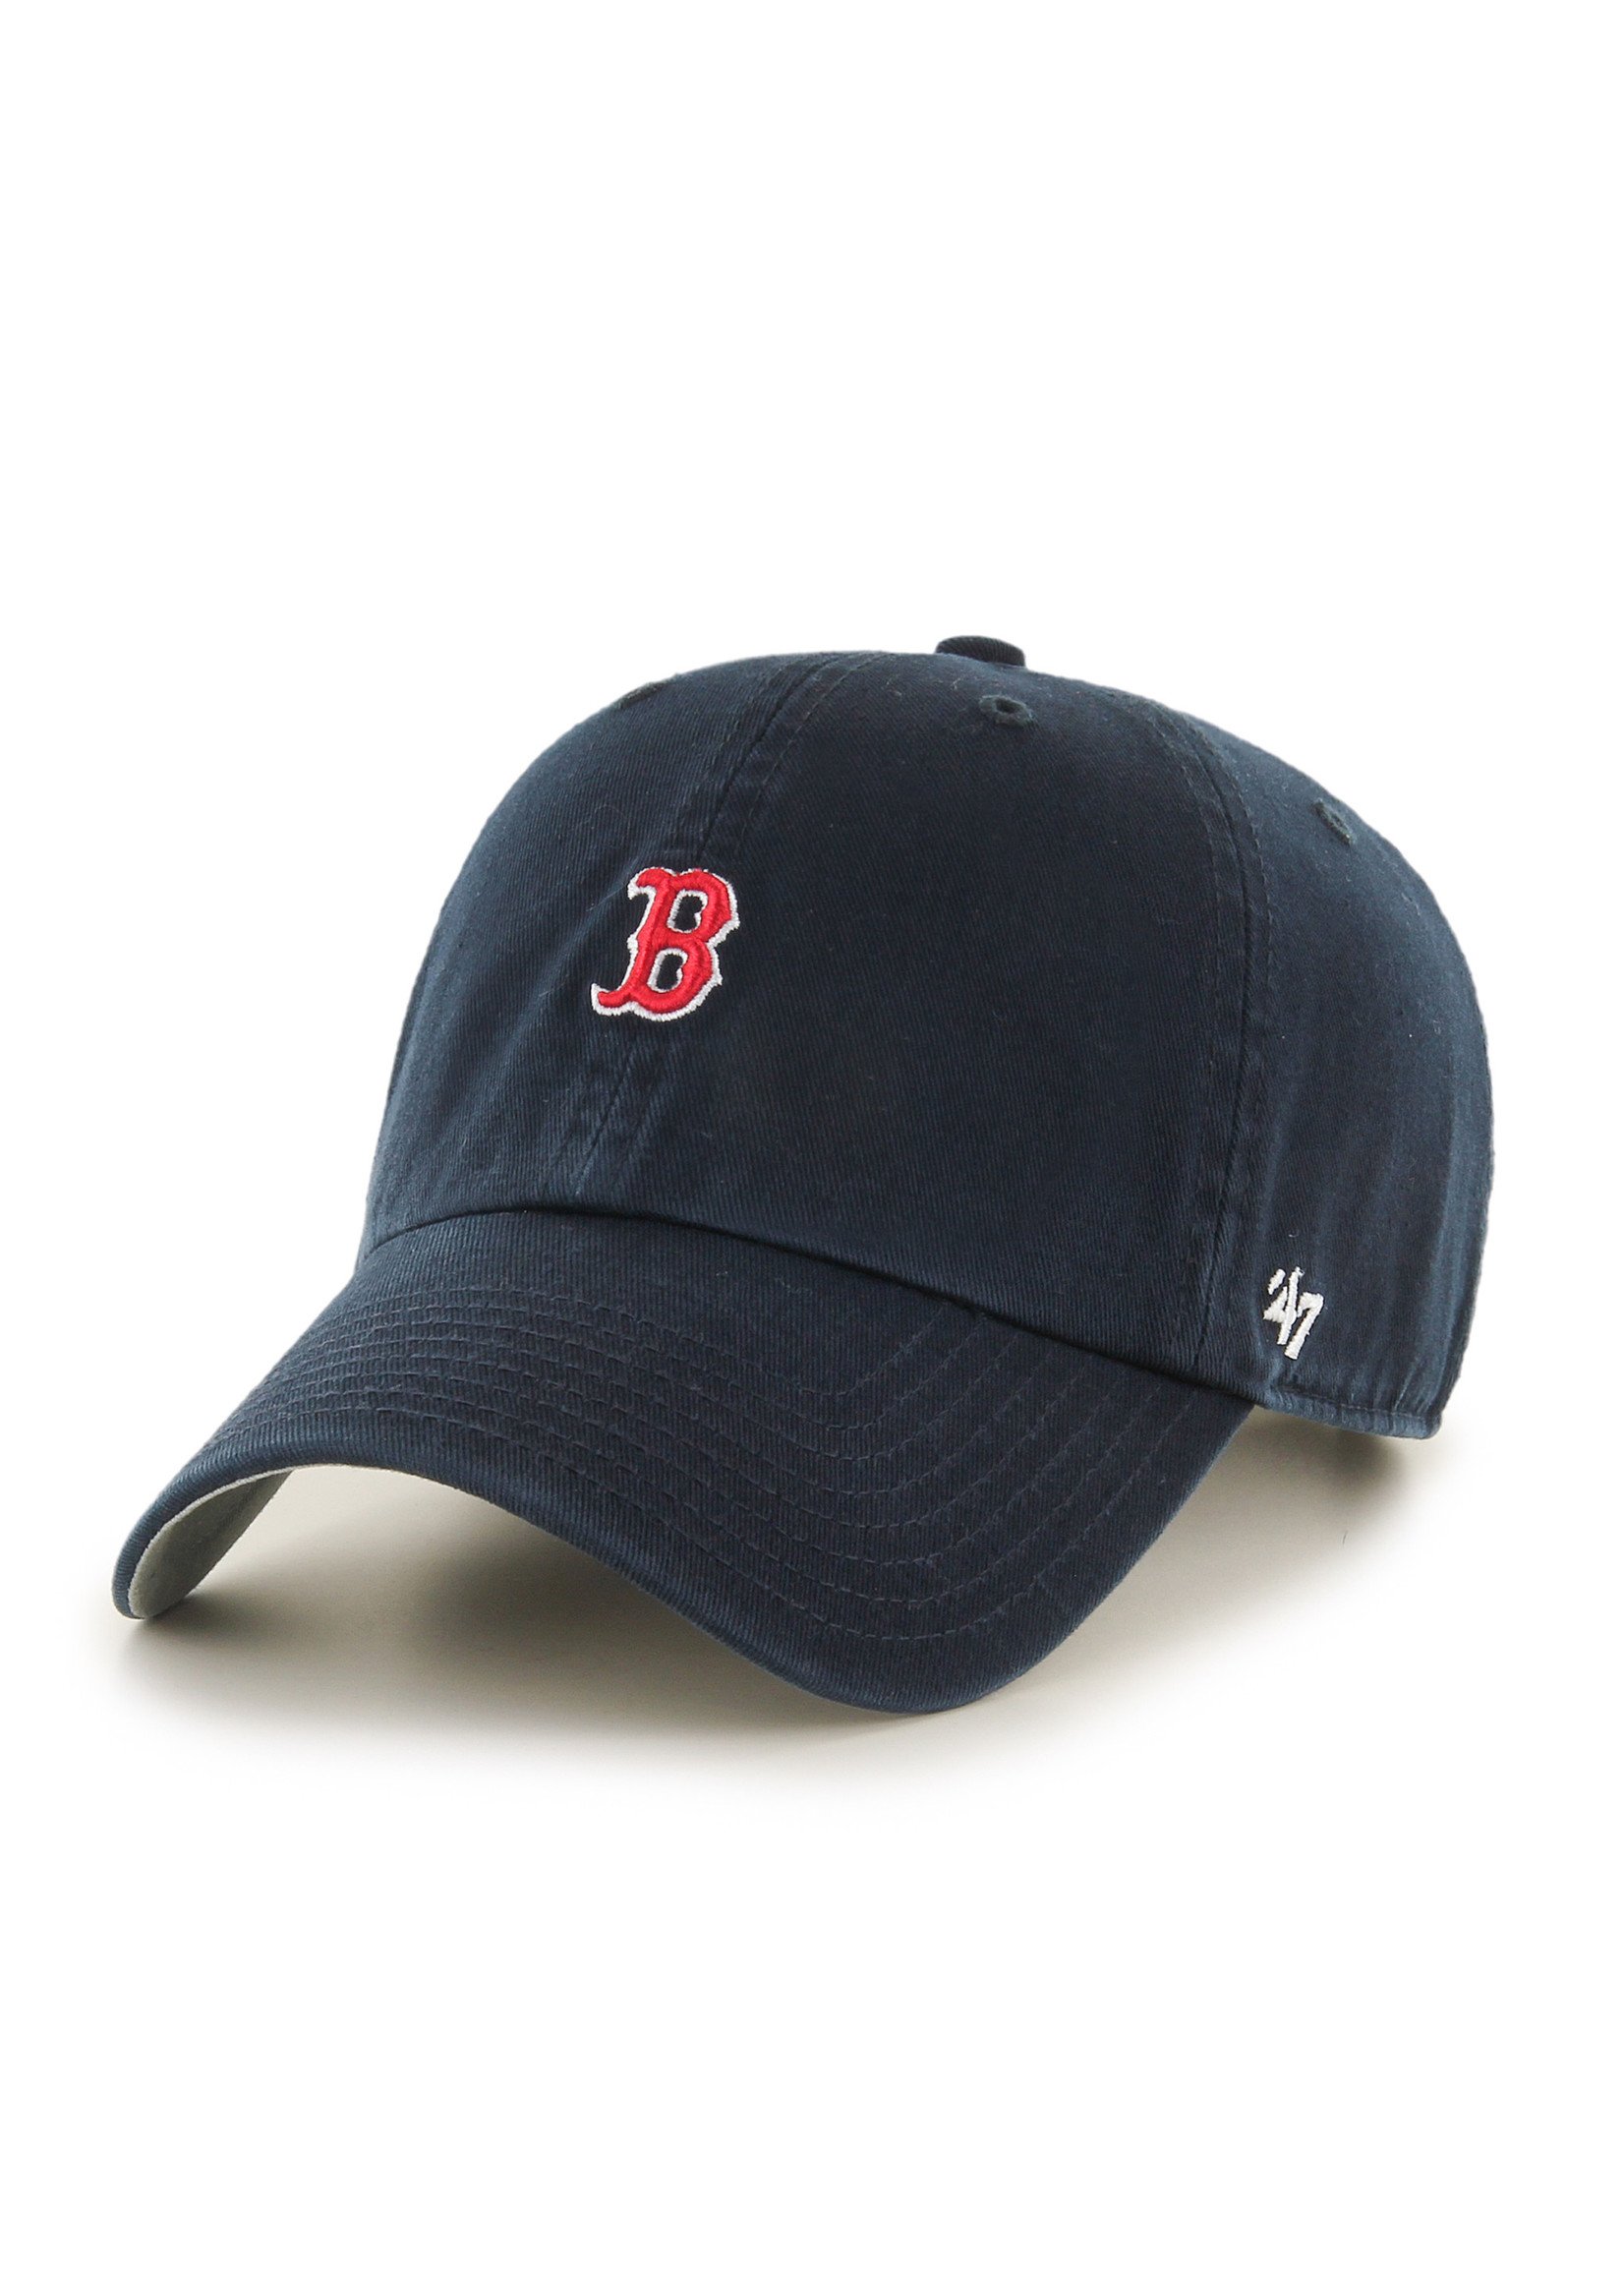 '47 Brand Boston Red Sox "B" Clean Up Hat Navy/Red Clearance Adjustable Women